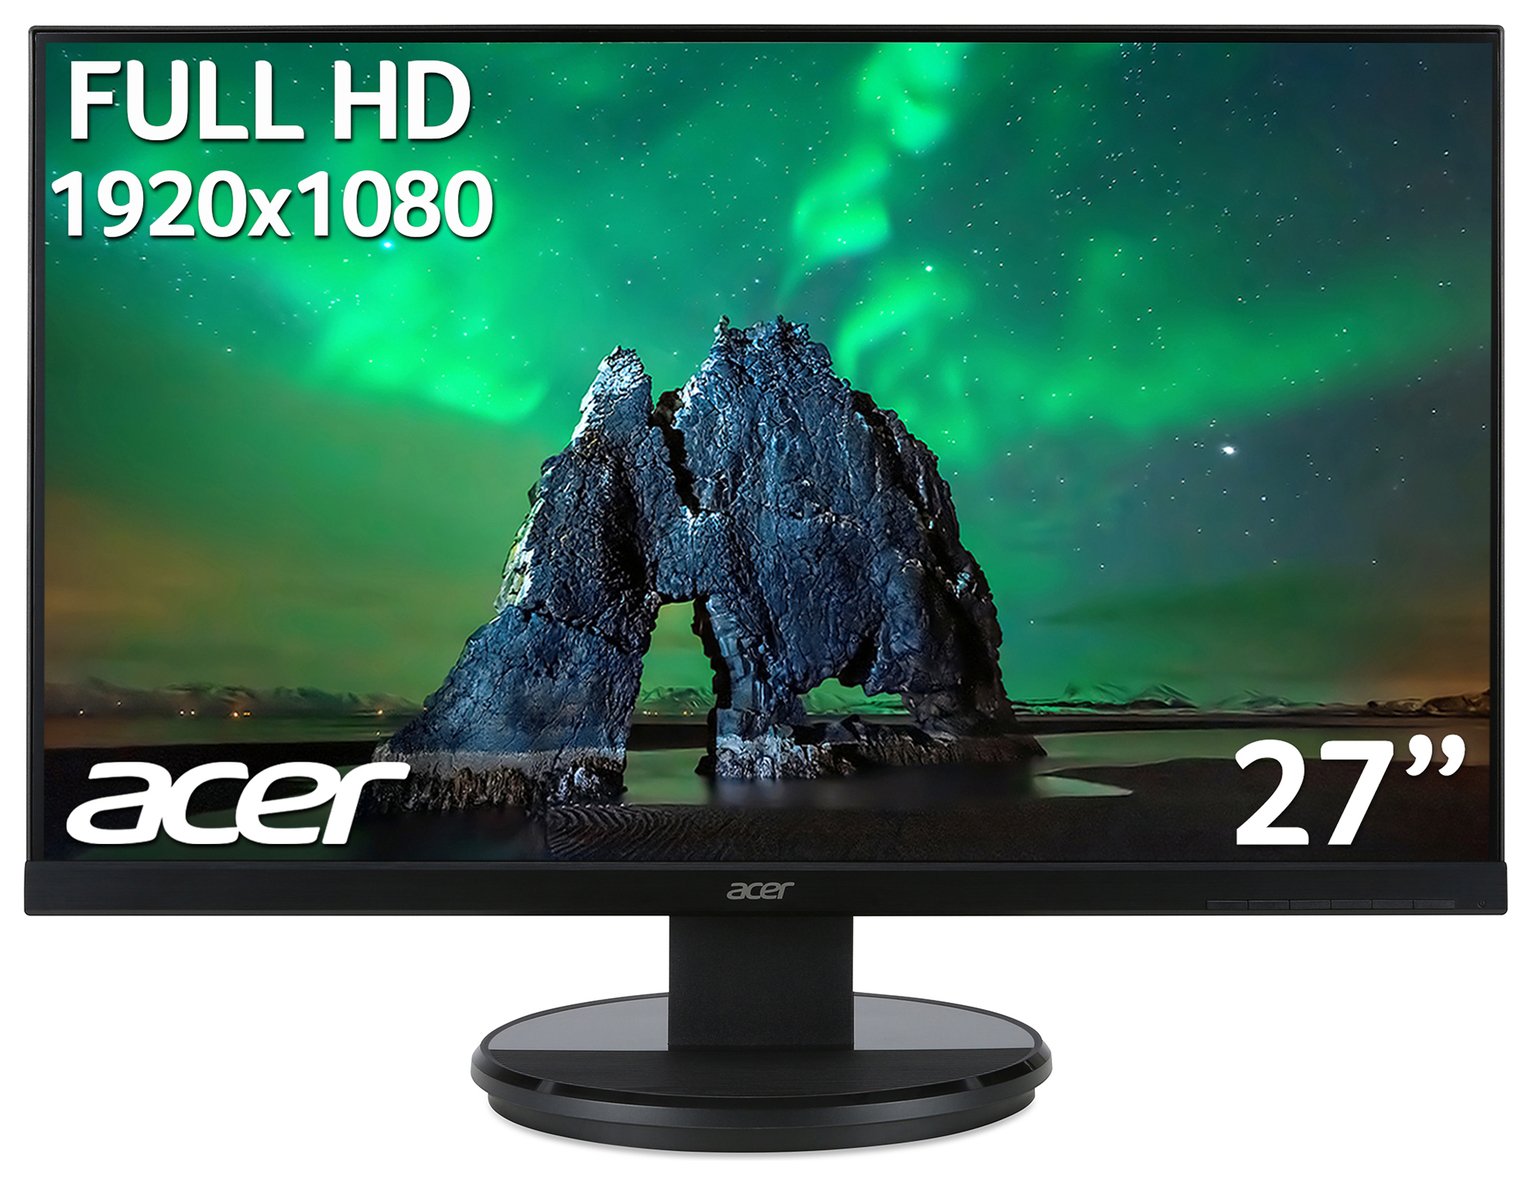 Acer K272HLH 27 Inch 75Hz FHD Monitor